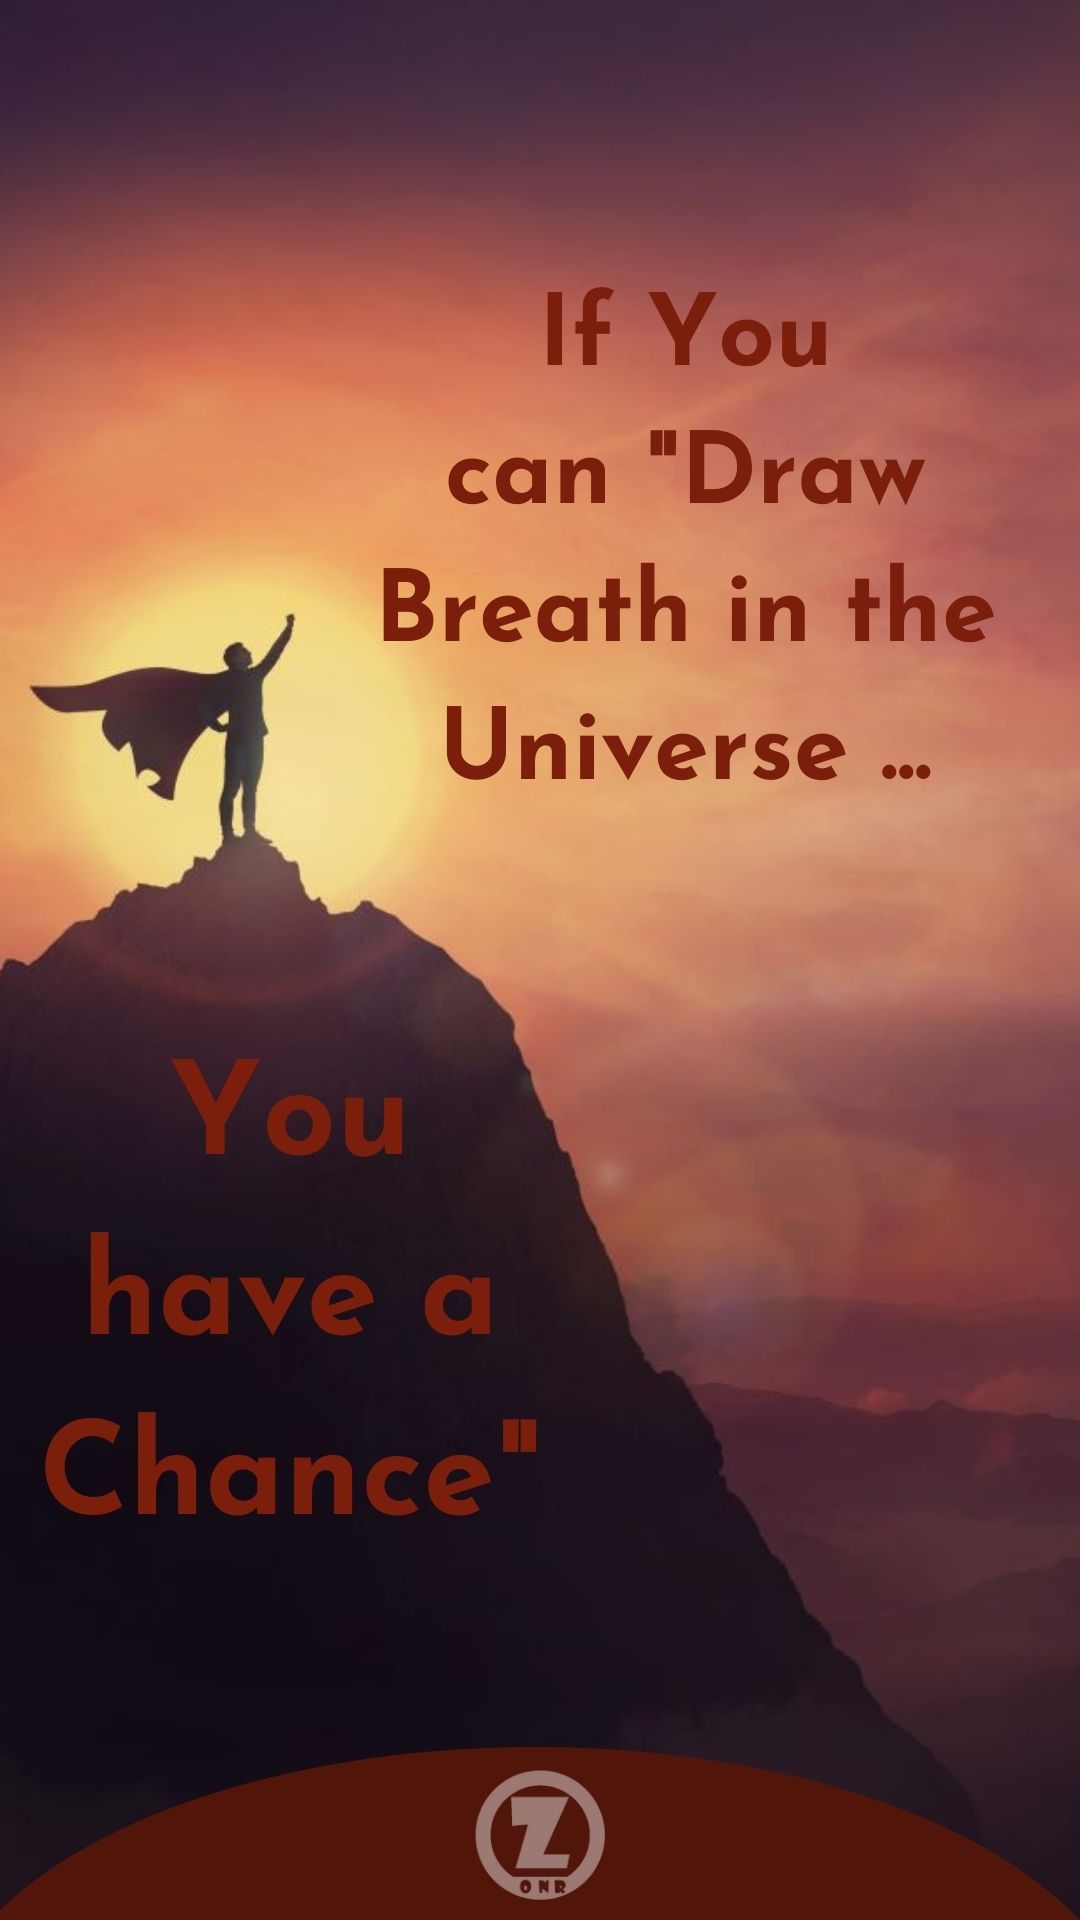 You are currently viewing If You can “Draw Breath in the Universe, You have a Chance” – Step 9